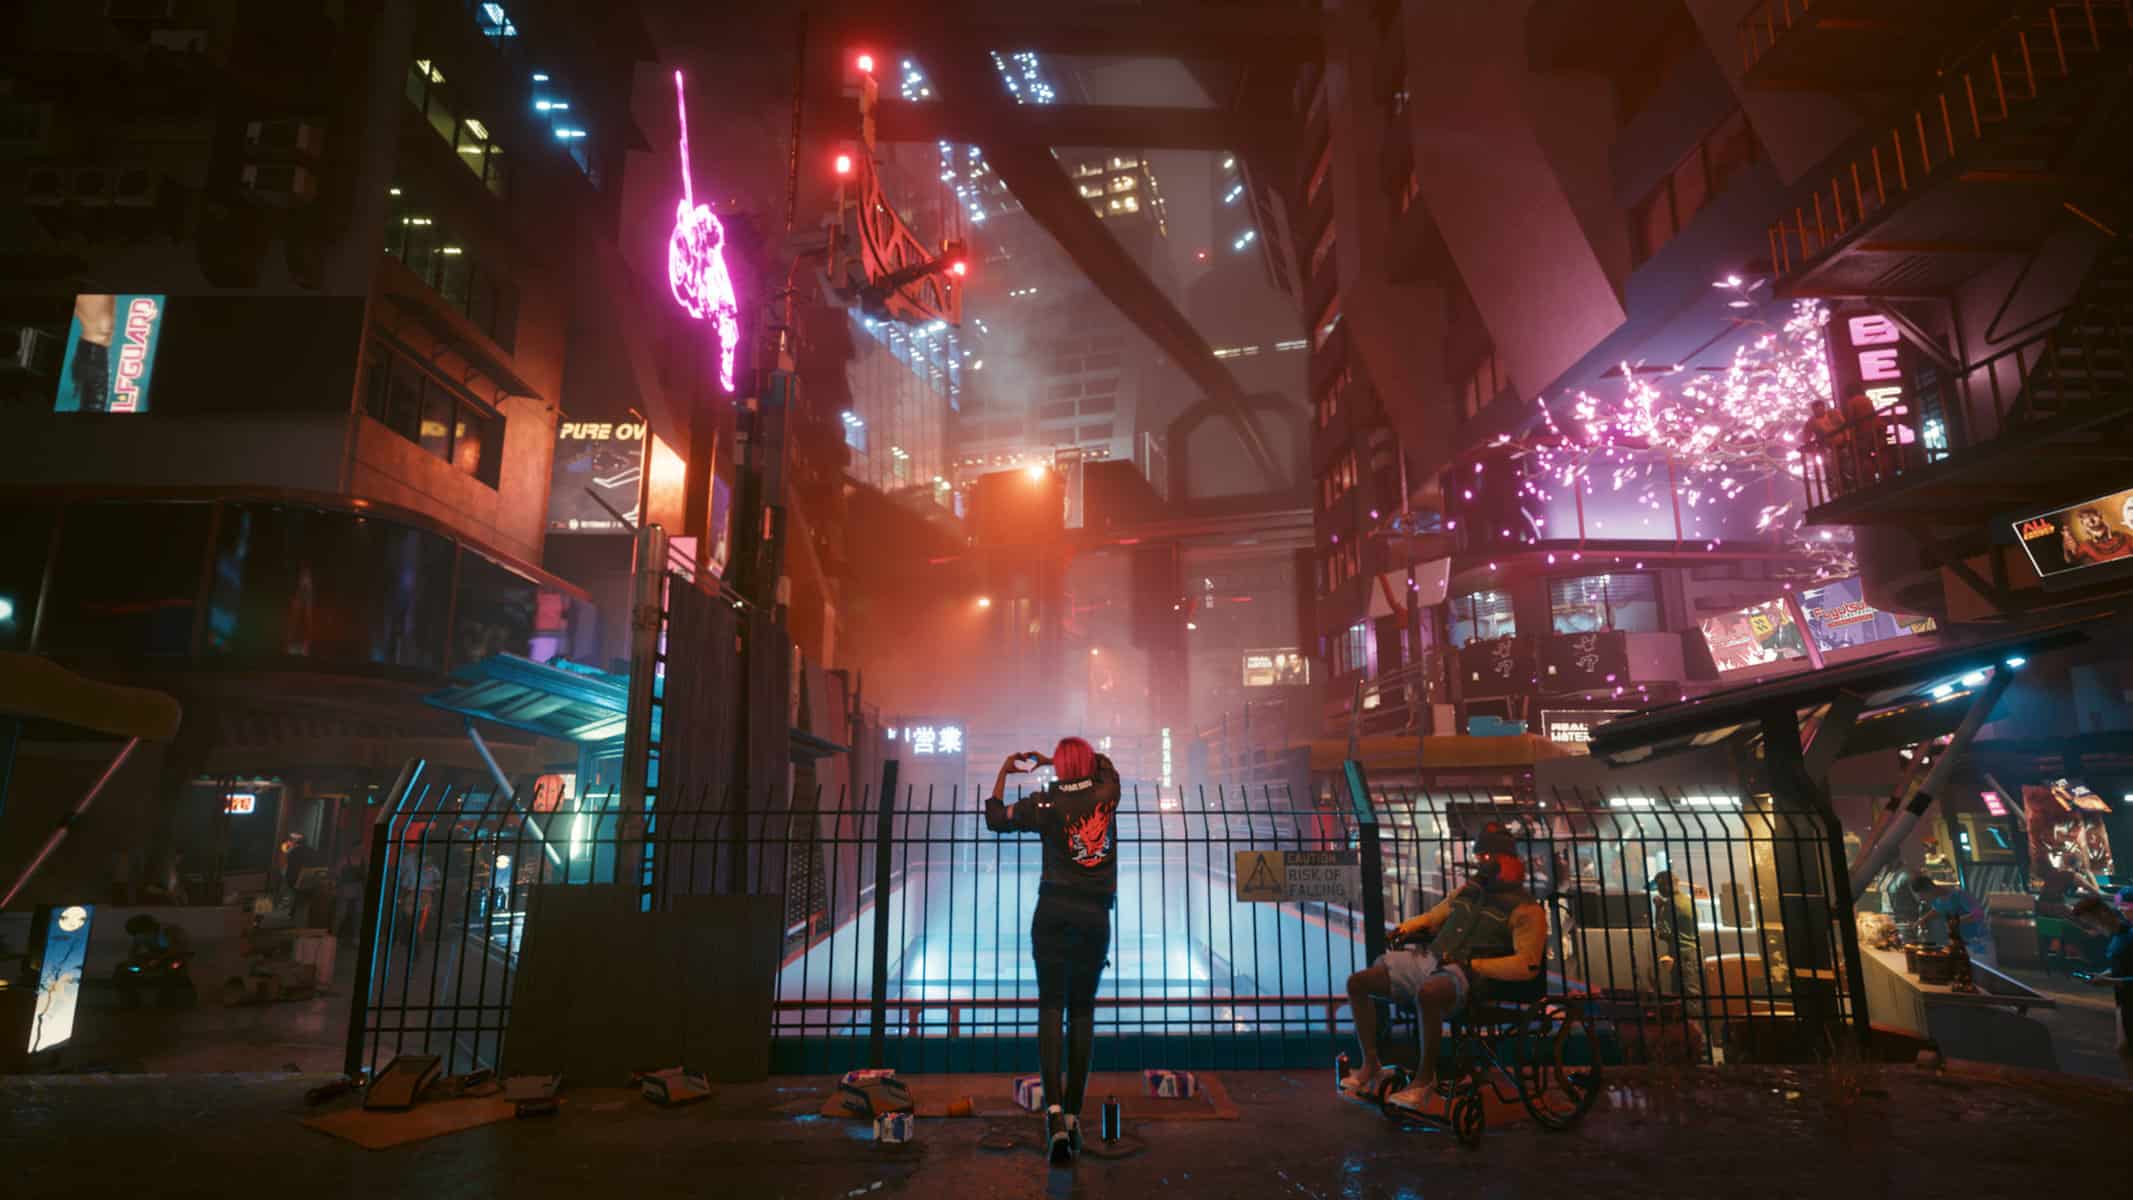 Cyberpunk 2077 Path Tracing Overdrive Patch 1.62 Out Now